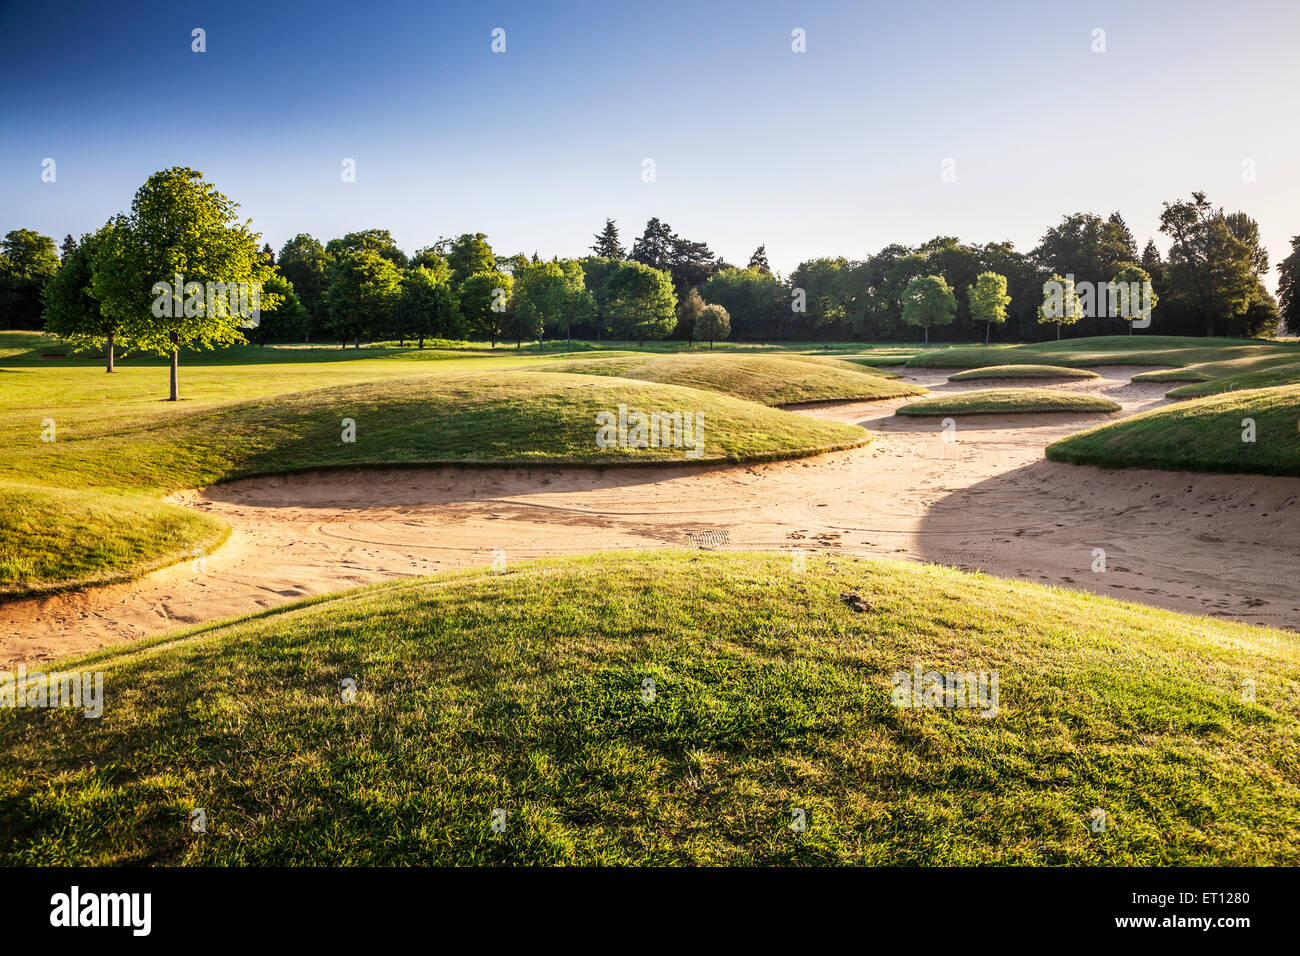 A  bunker on a typical golf course in early morning sunshine. Stock Photo